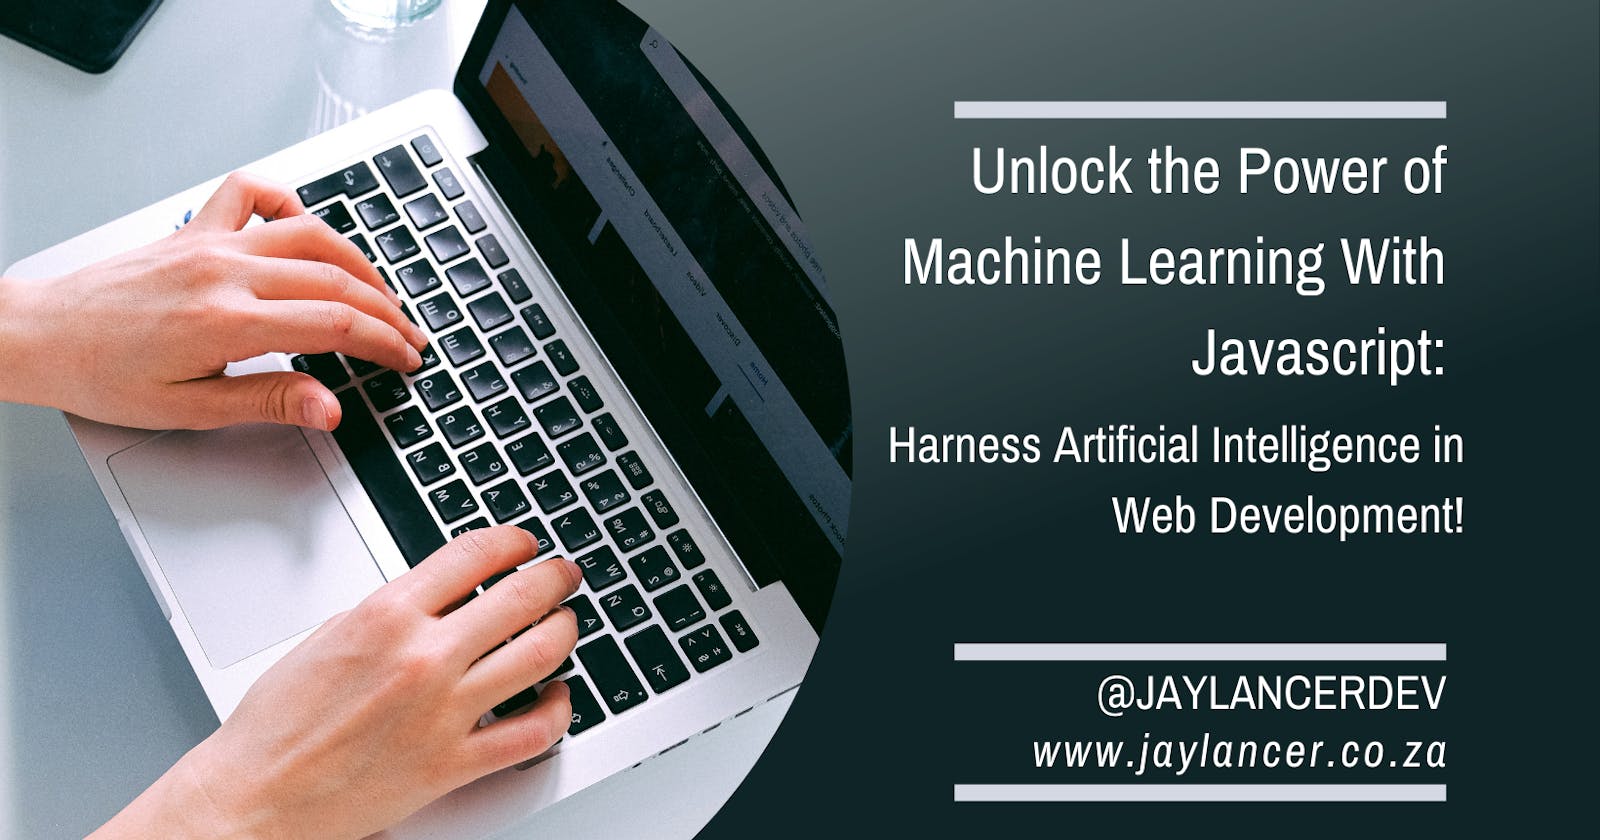 Unlock the Power of Machine Learning With Javascript: Harness Artificial Intelligence in Web Development!